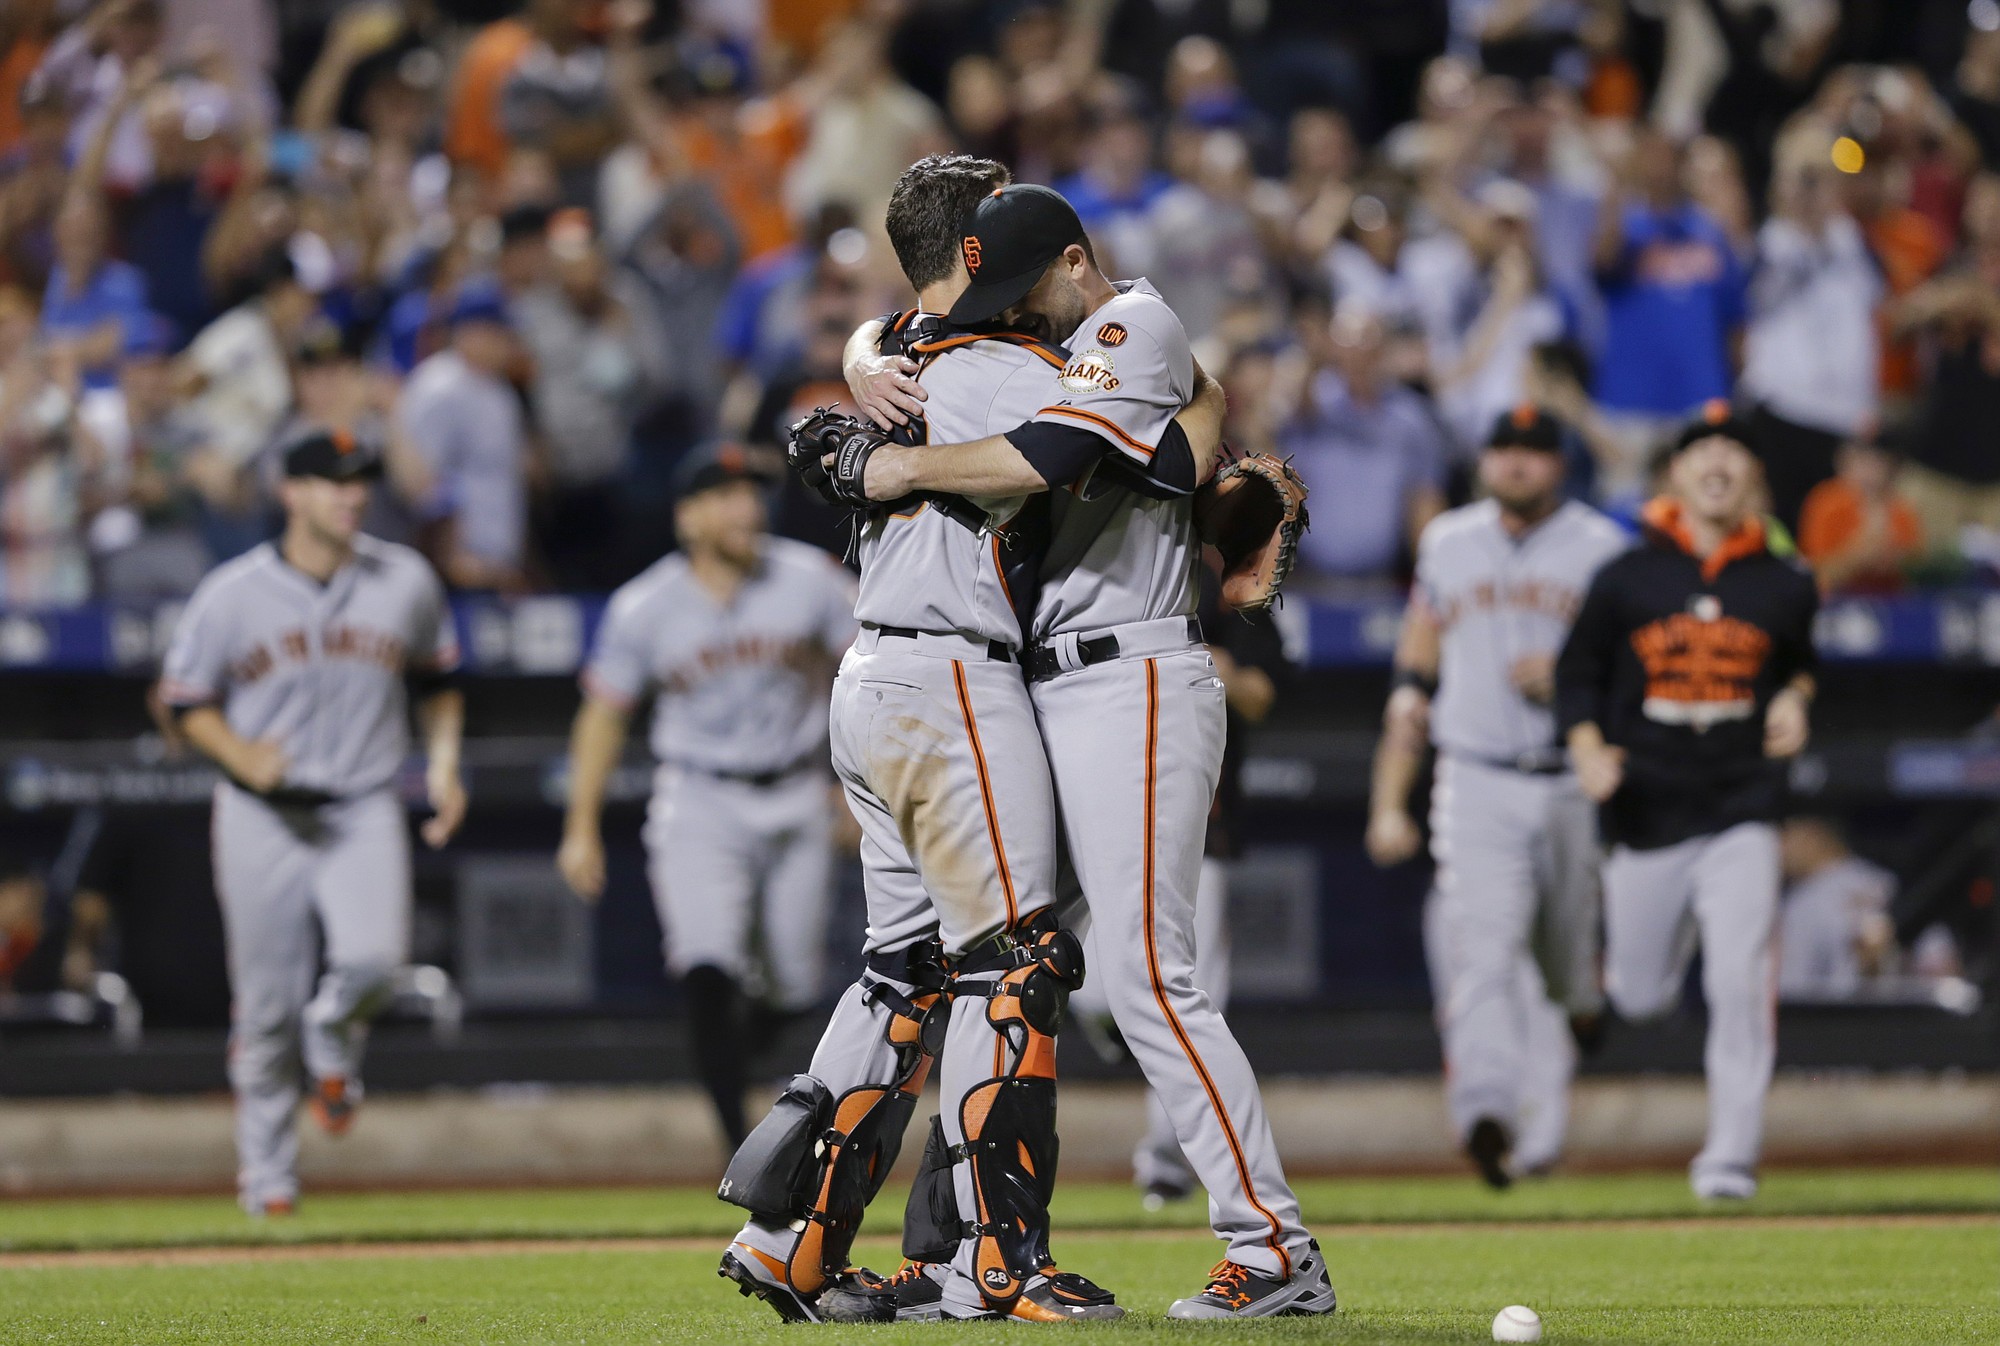 San Francisco Giants starting pitcher Chris Heston hugs catcher Buster Posey, left, after Heston's no-hitter against the New York Mets on Tuesday.